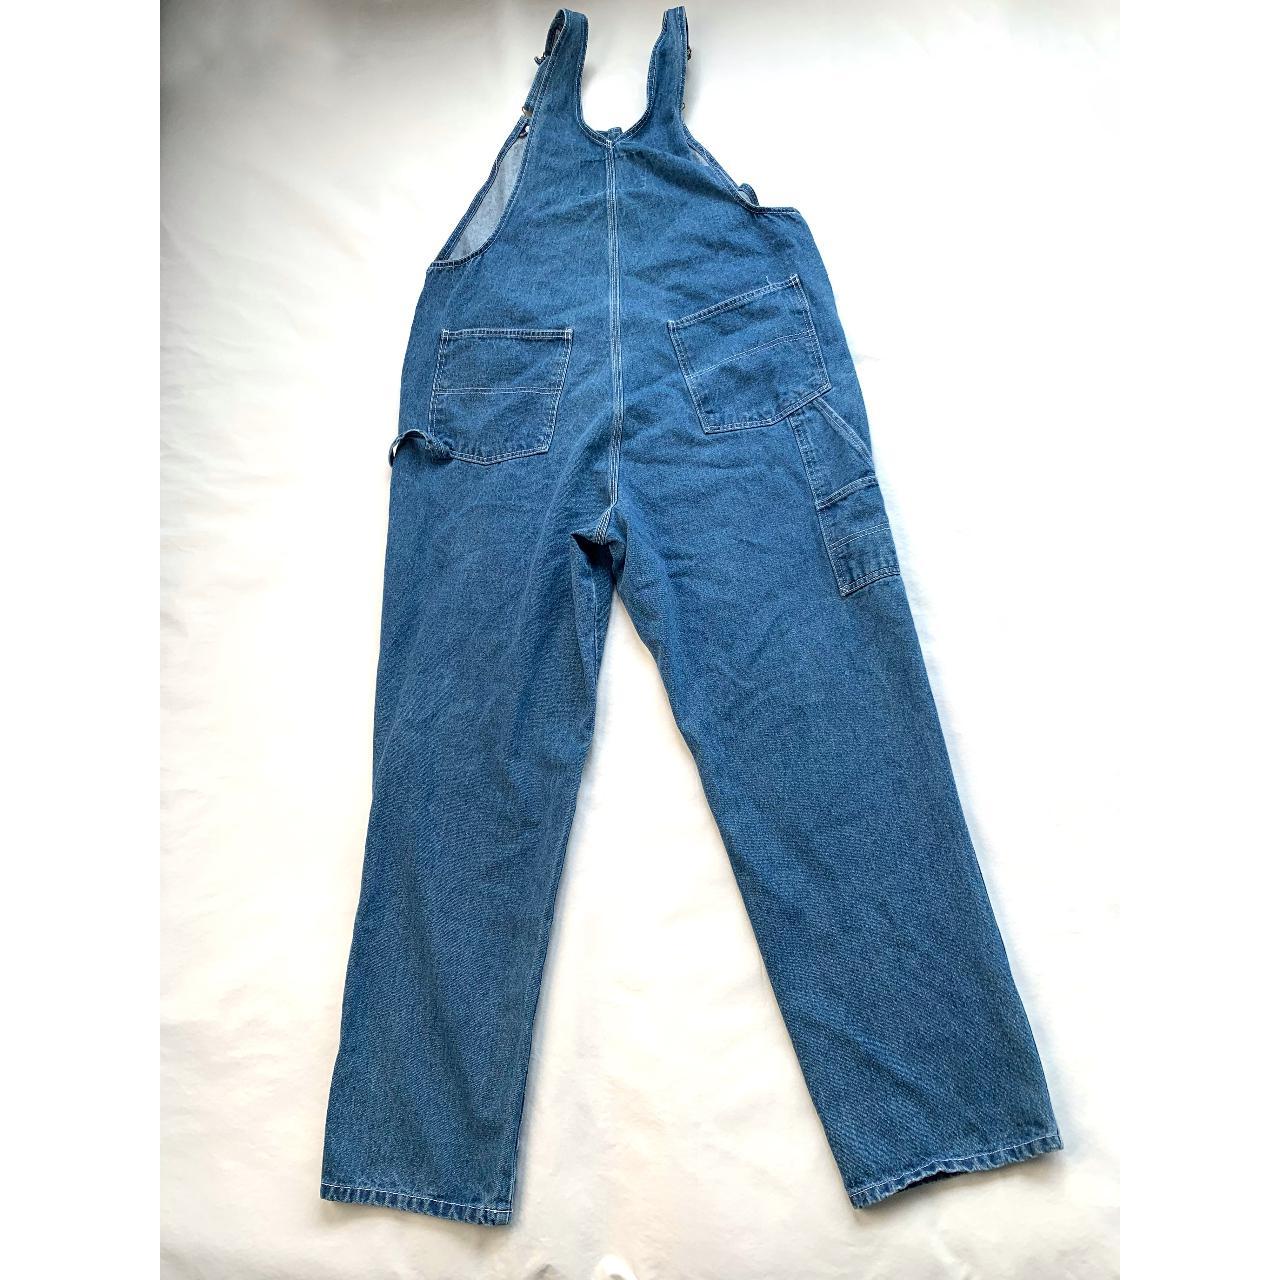 Product Image 2 - Vintage 90s jean overalls, Guide